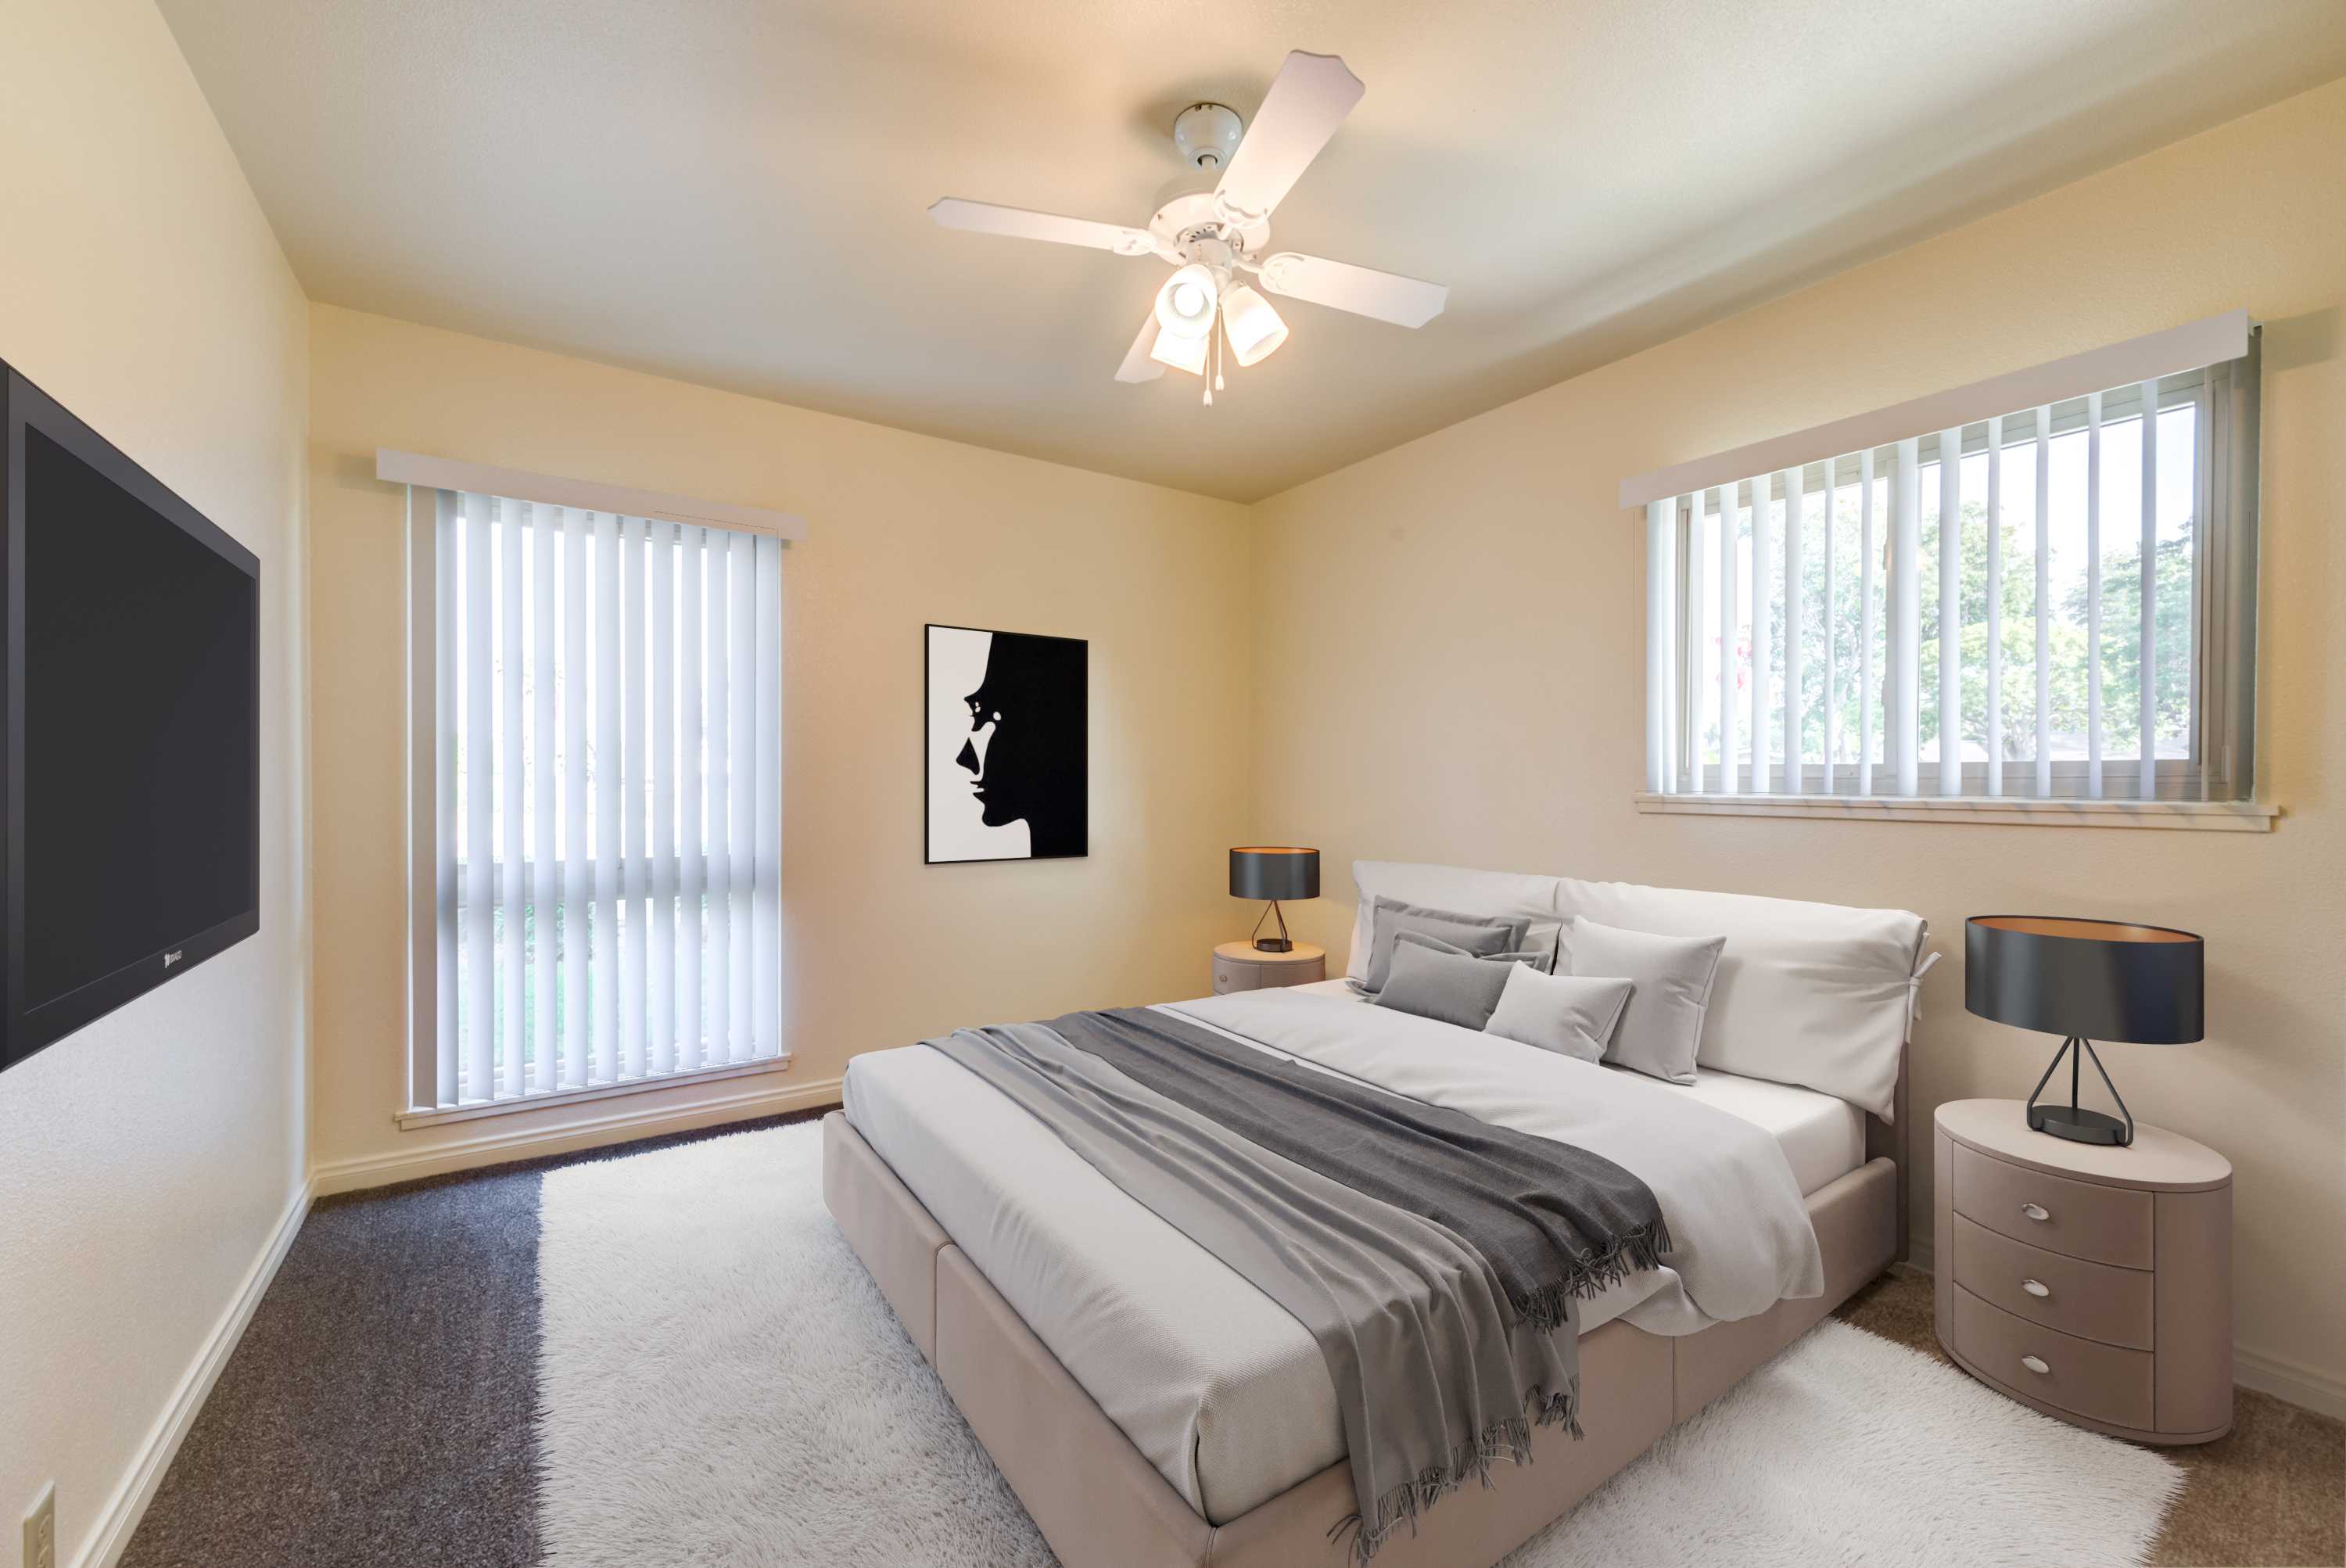 A furnished bedroom in a home at Santa Rosa in Point Mugu, California